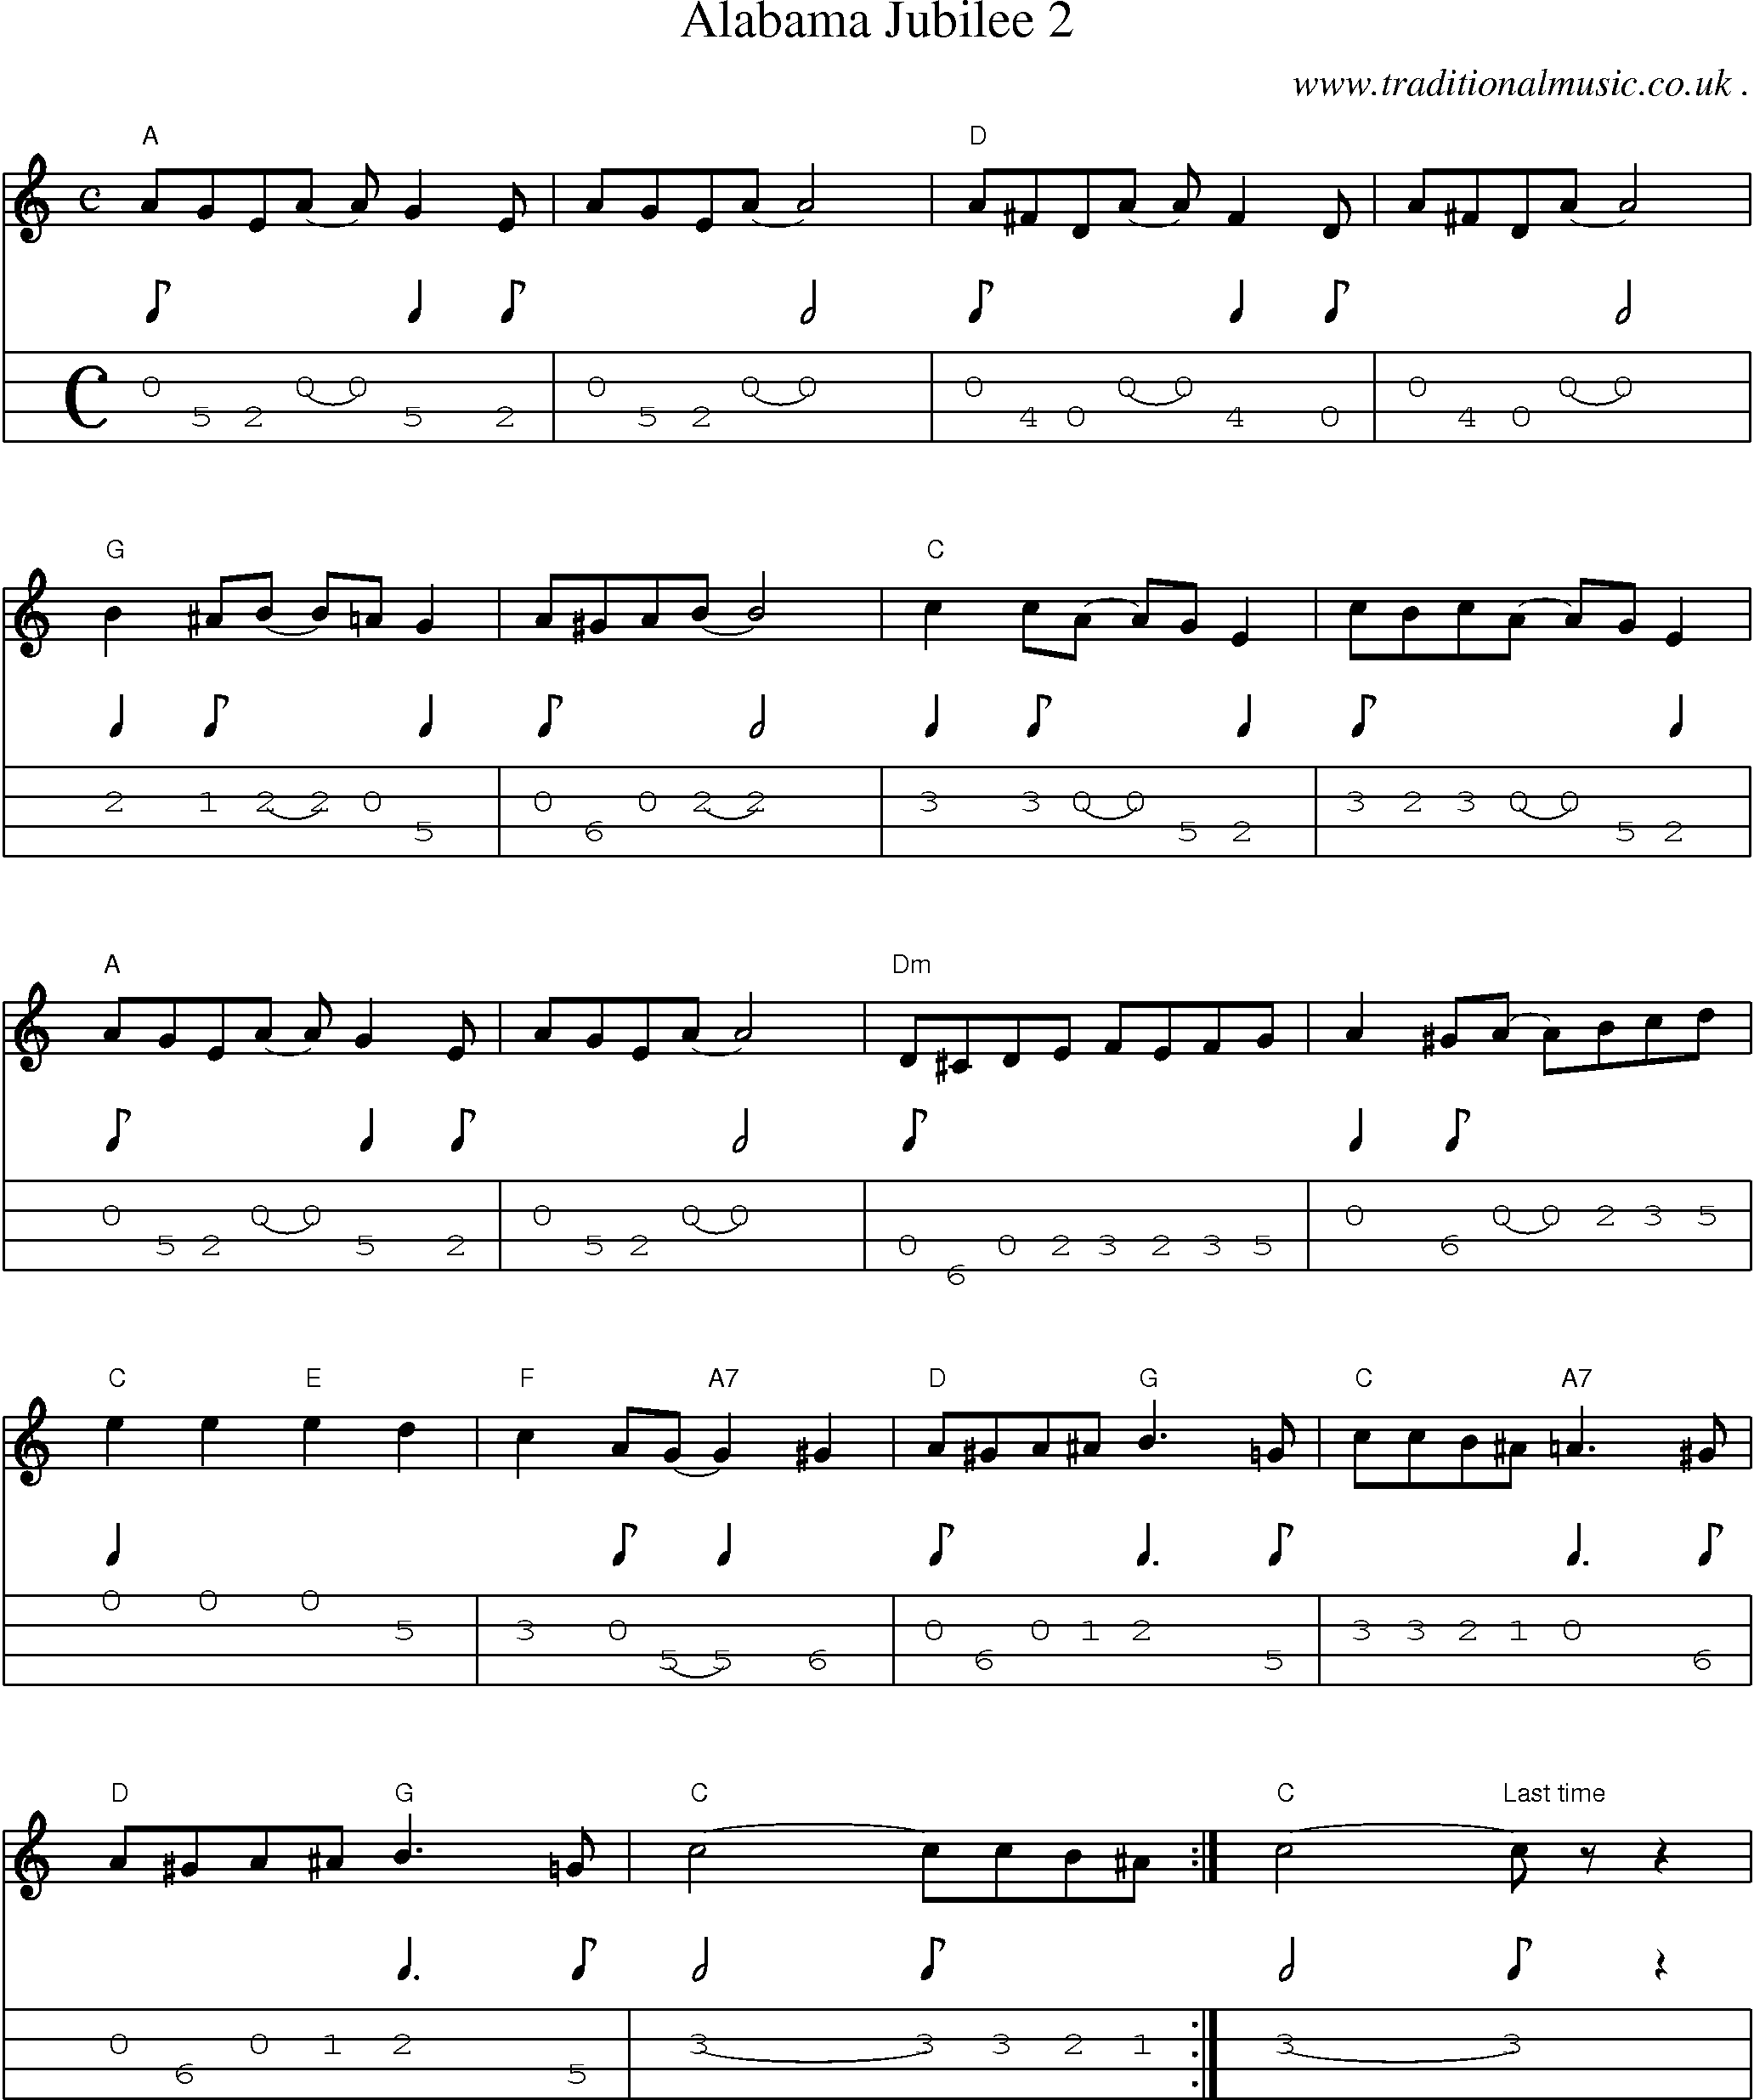 American Old-time music, Scores and Tabs for Mandolin - Alabama Jubilee 2